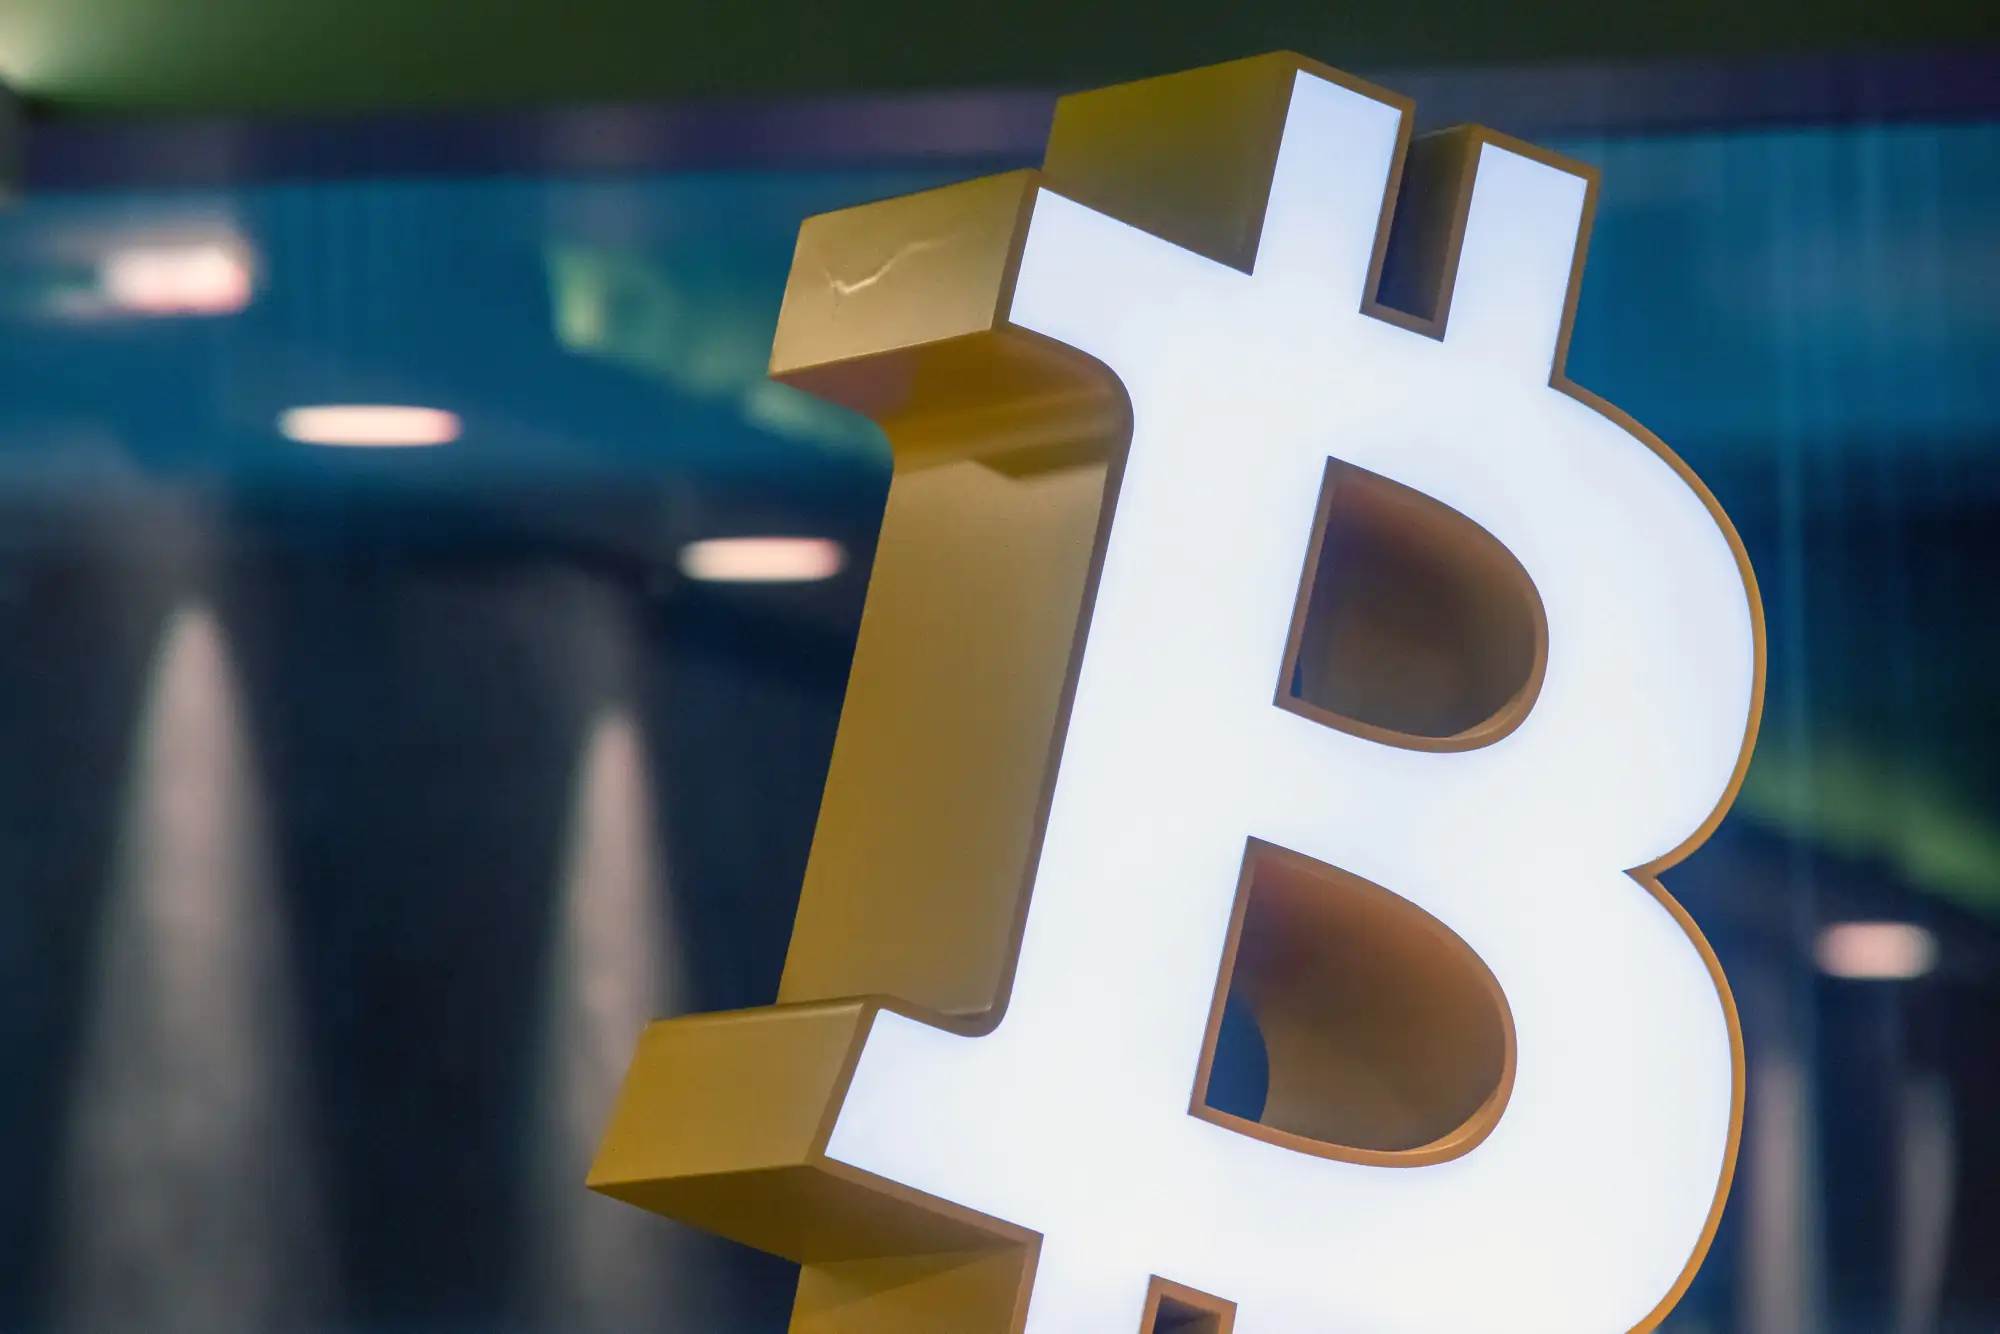 Bitcoin Fans Look to $30,000 as Next Target as Trouble Swirls Around Banks